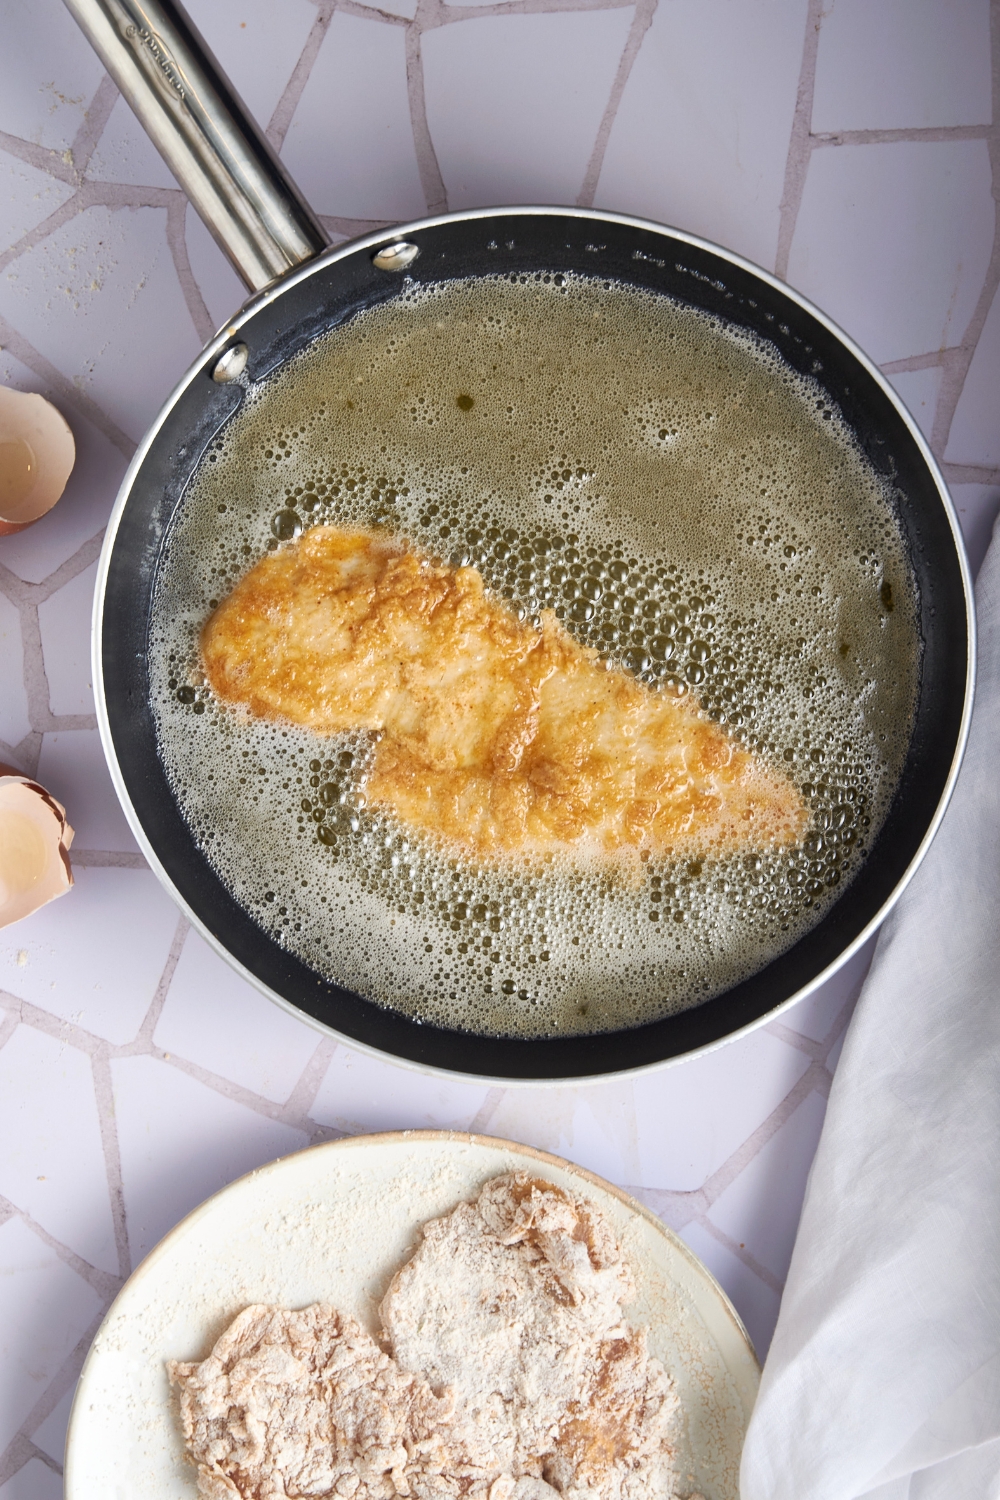 A skillet filled with oil with a piece of chicken being fried in it.